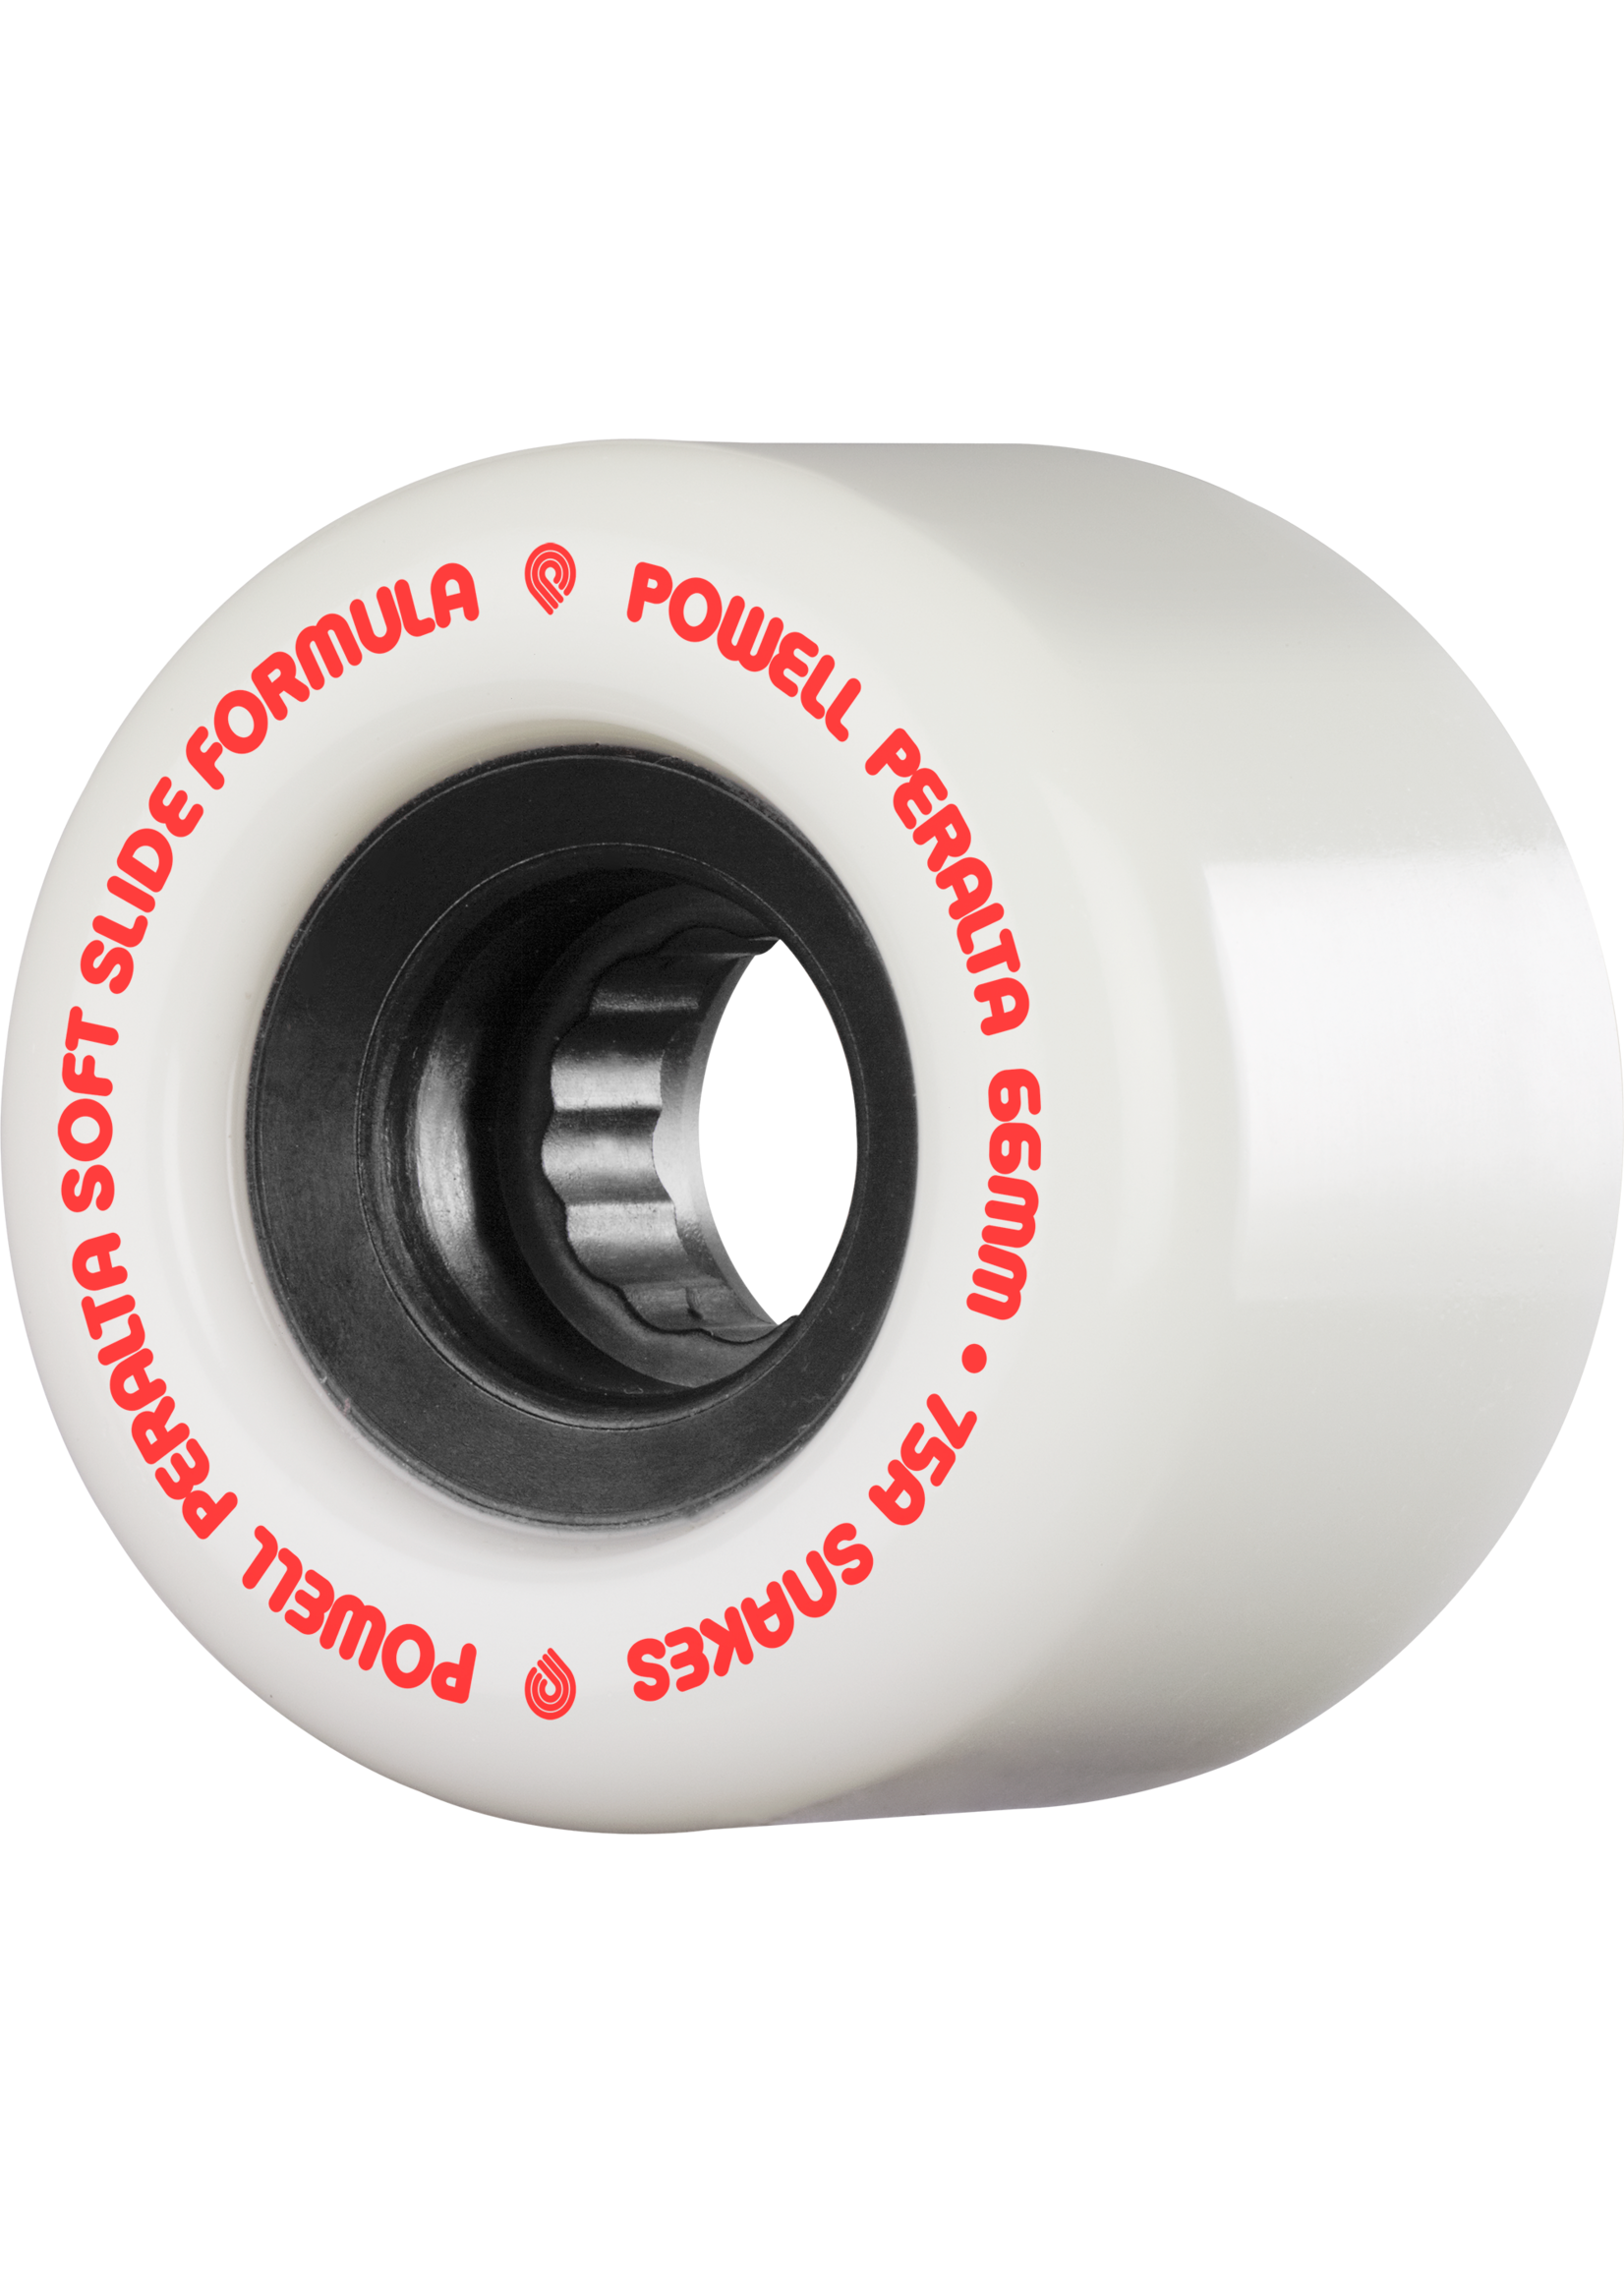 Powell Peralta Snakes 66mm/75a White